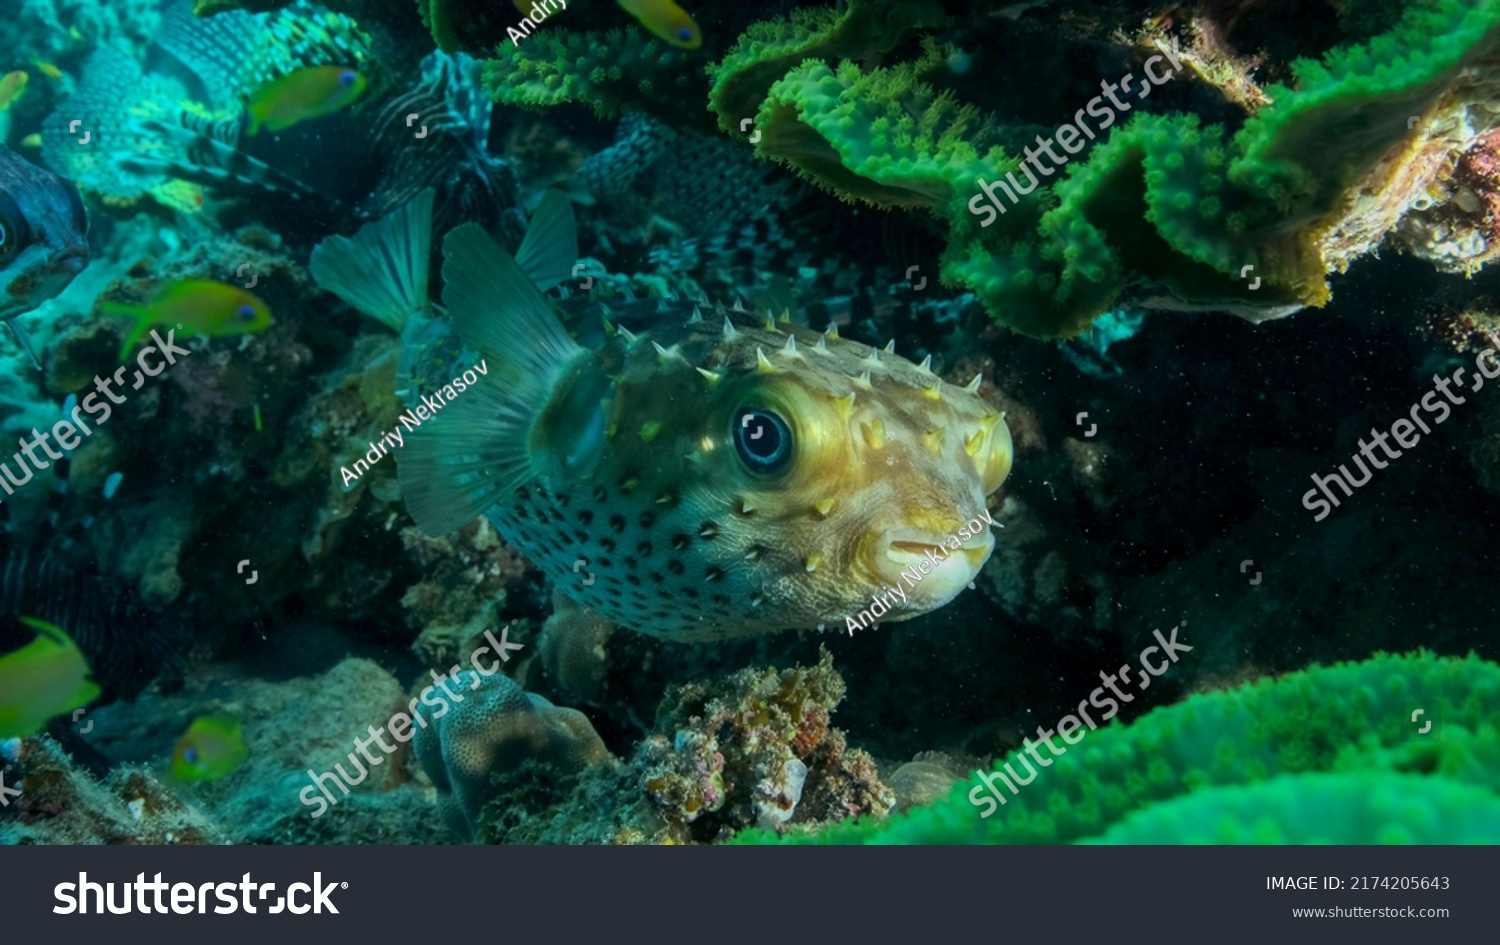 12 Simply porcupine fish Images, Stock Photos & Vectors | Shutterstock